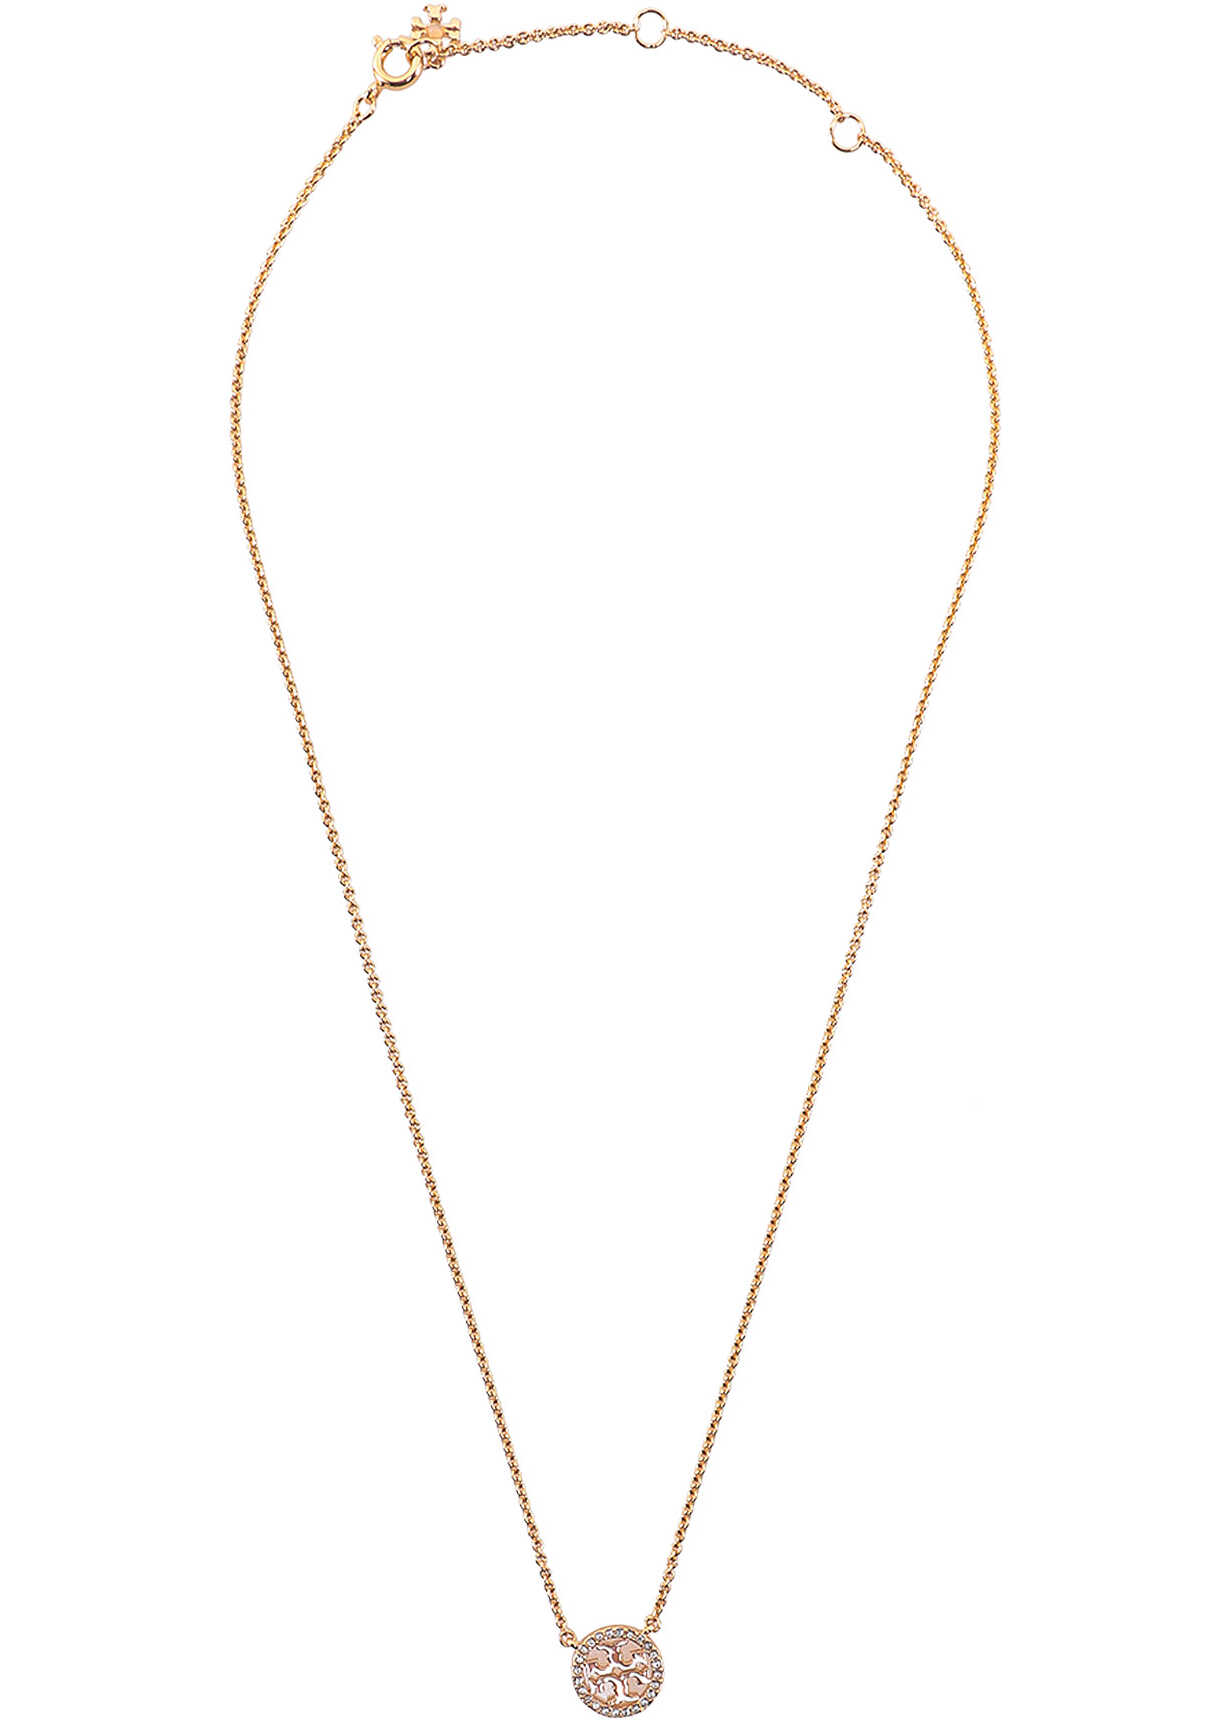 Tory Burch Necklace Gold image0